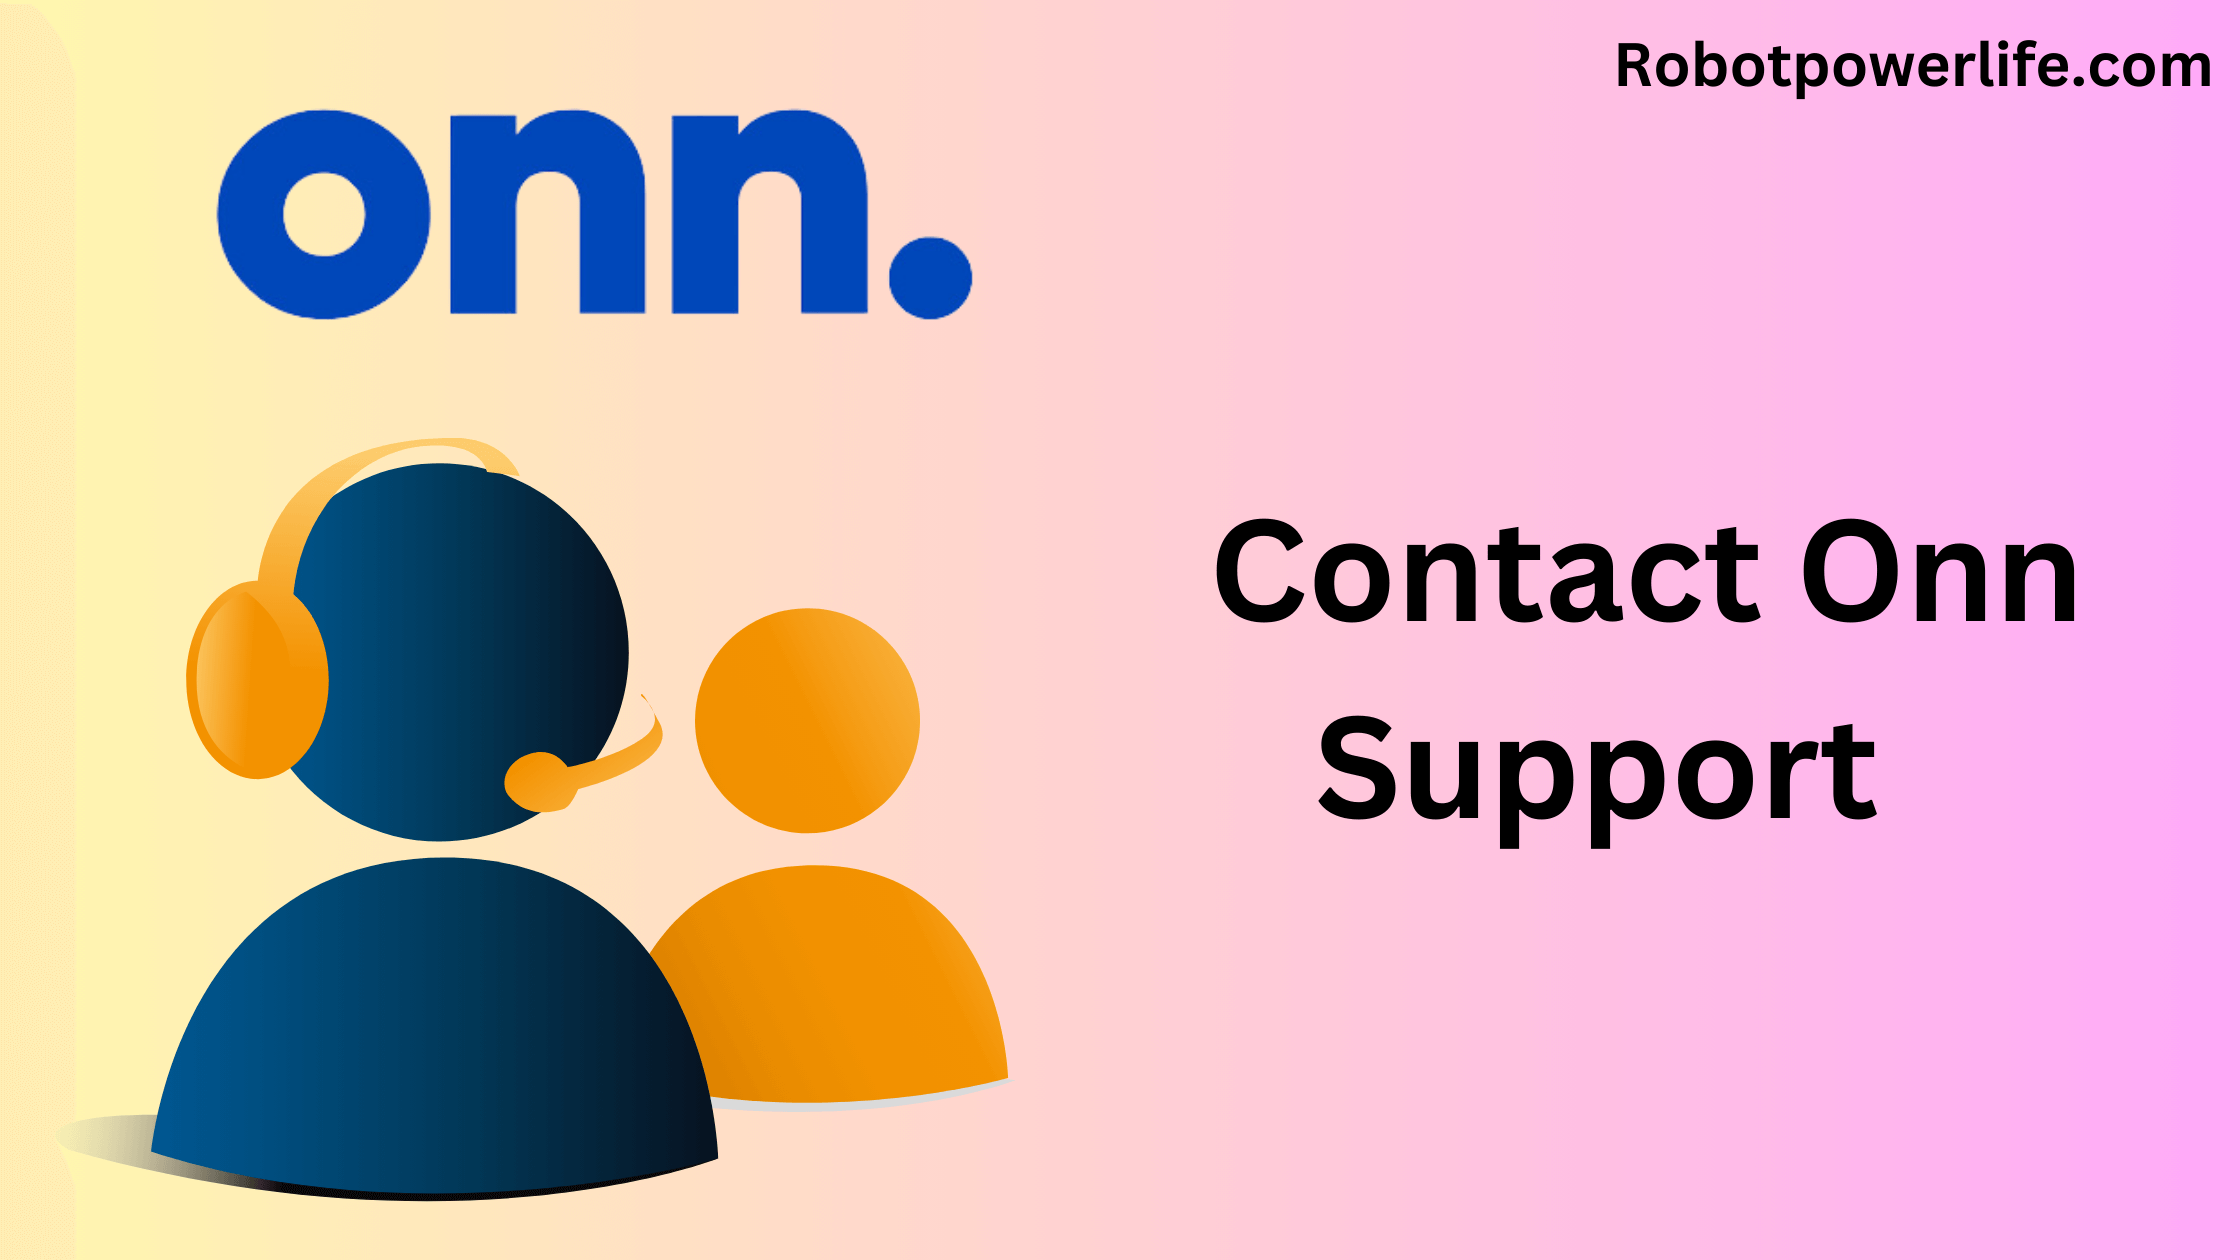 Contact Onn Support